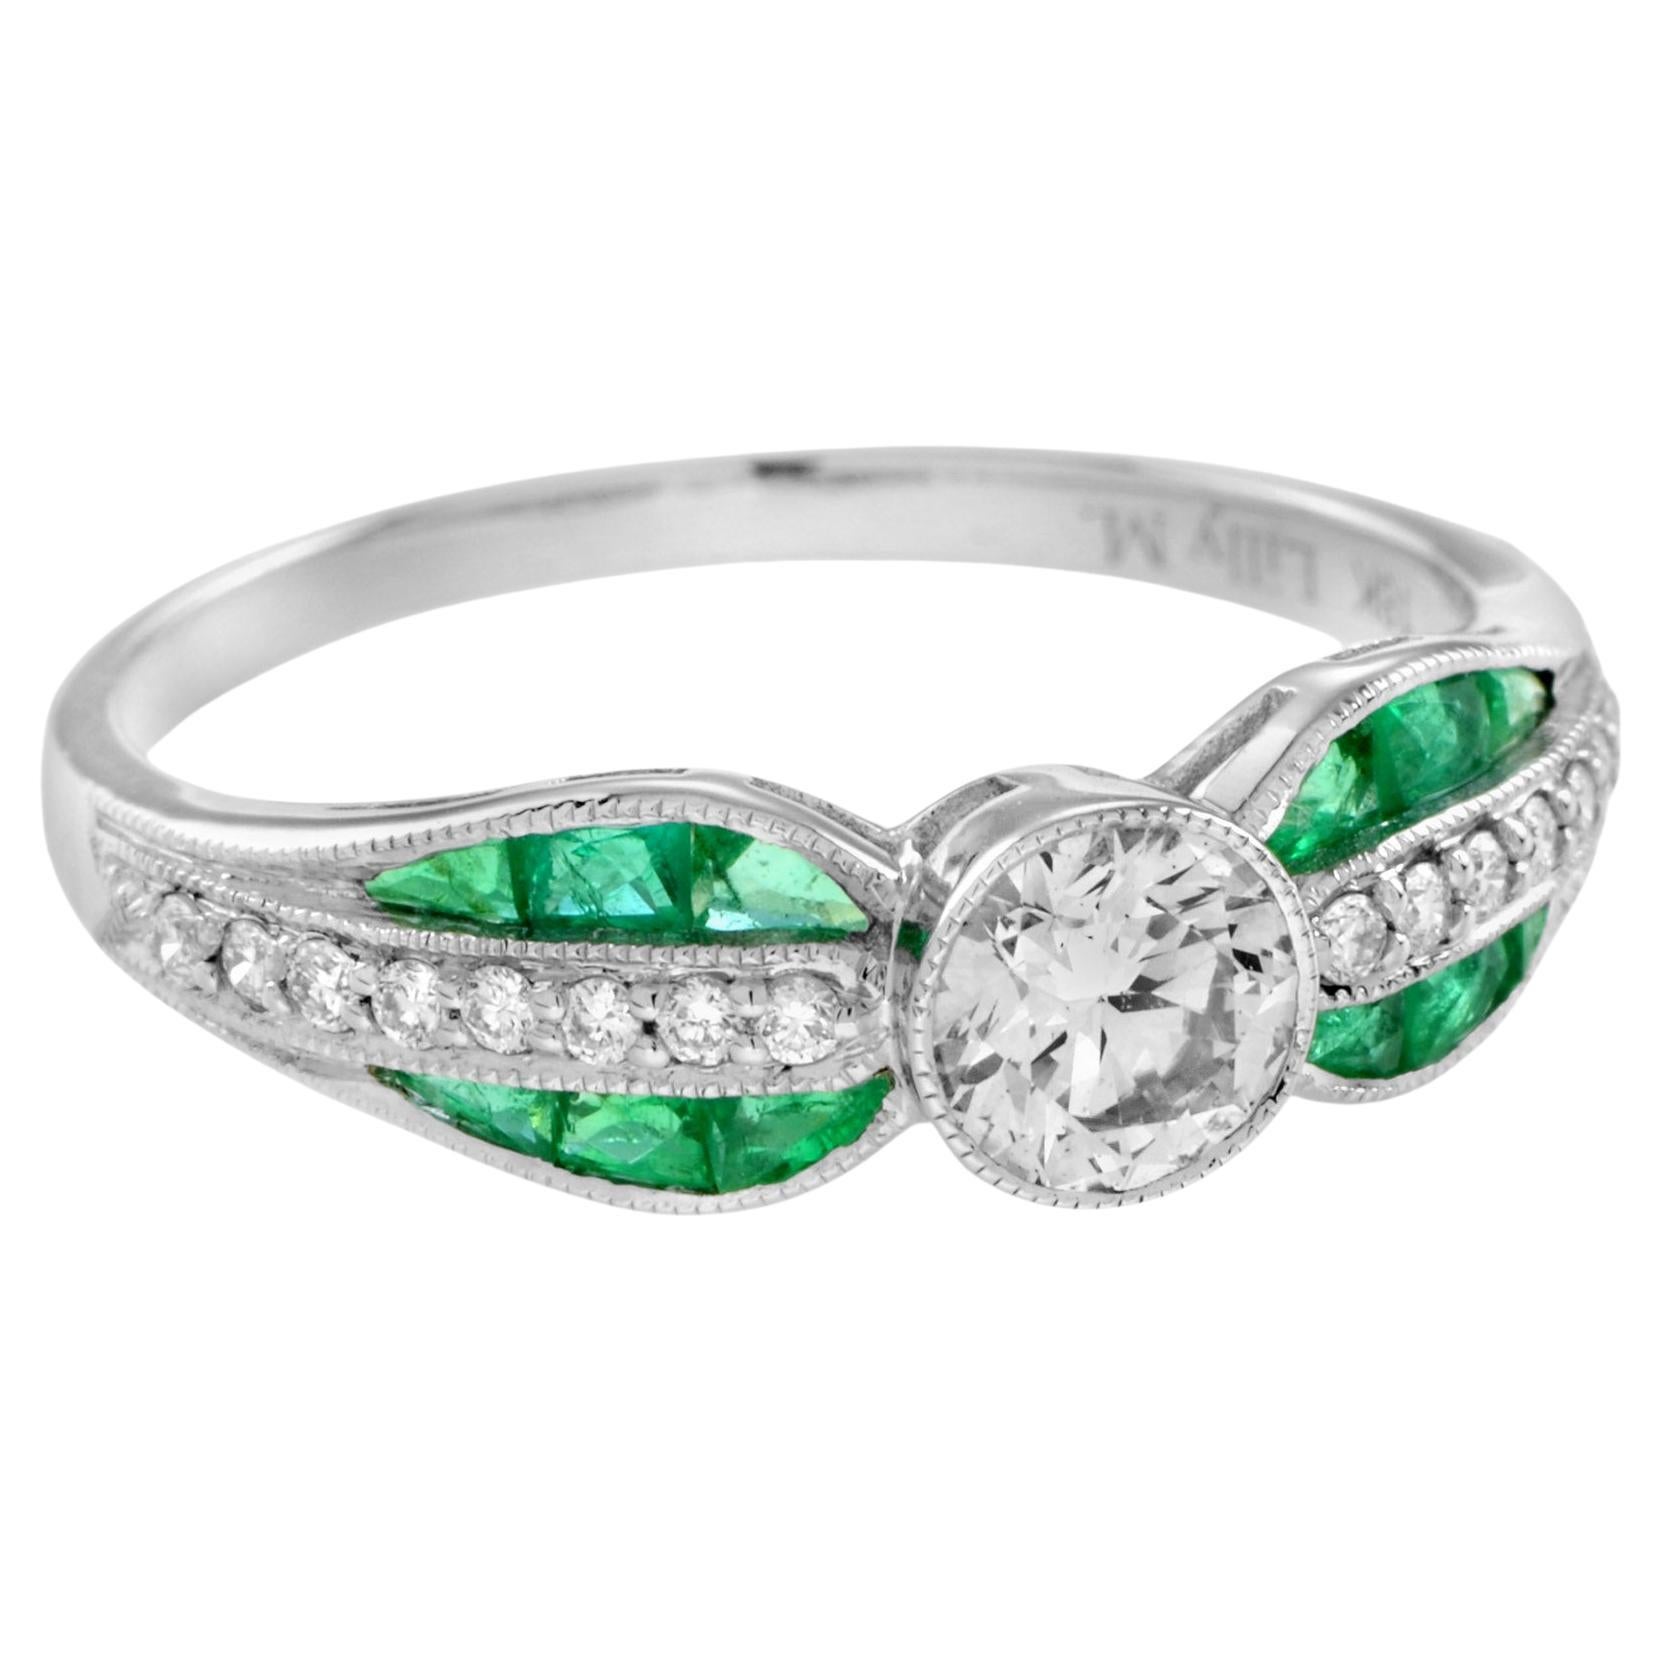 For Sale:  Diamond and Emerald Art Deco Style Solitaire Ring in 18K White Gold